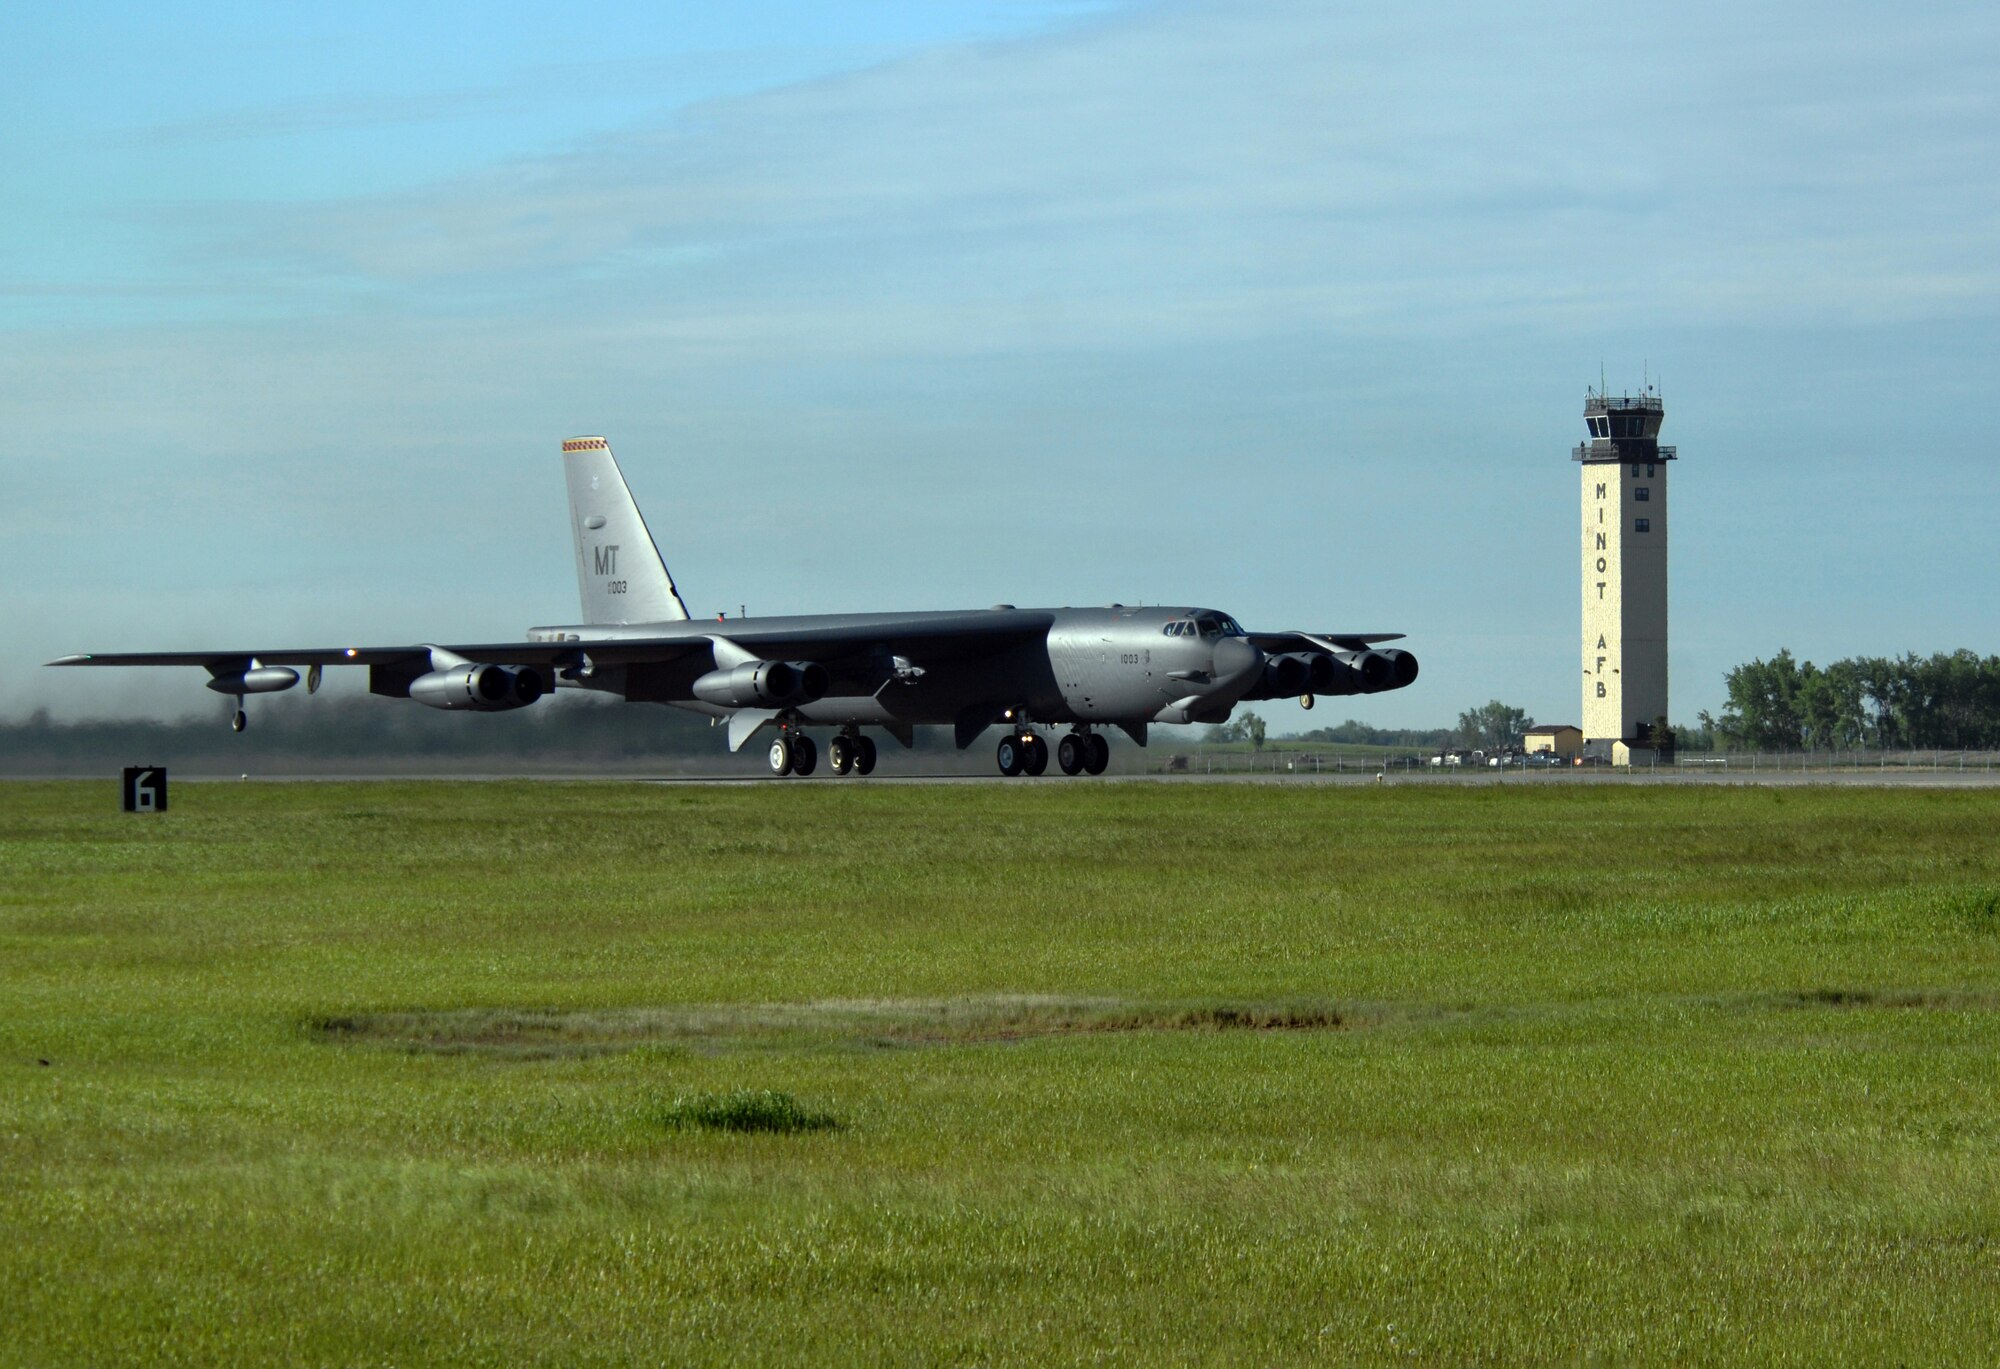 MINOT AIR FORCE BASE, N.D. -- A B-52H Stratofortess takes off on its way to Andersen AFB, Guam, as part of a deployment here June 2. During the six-month deployment, nearly 350 Airmen and several B-52s will provide U.S. Pacific Command with a continuous bomber presence in the Asia-Pacific region. (U.S. Air Force photo by Senior Airman Michael J. Veloz)